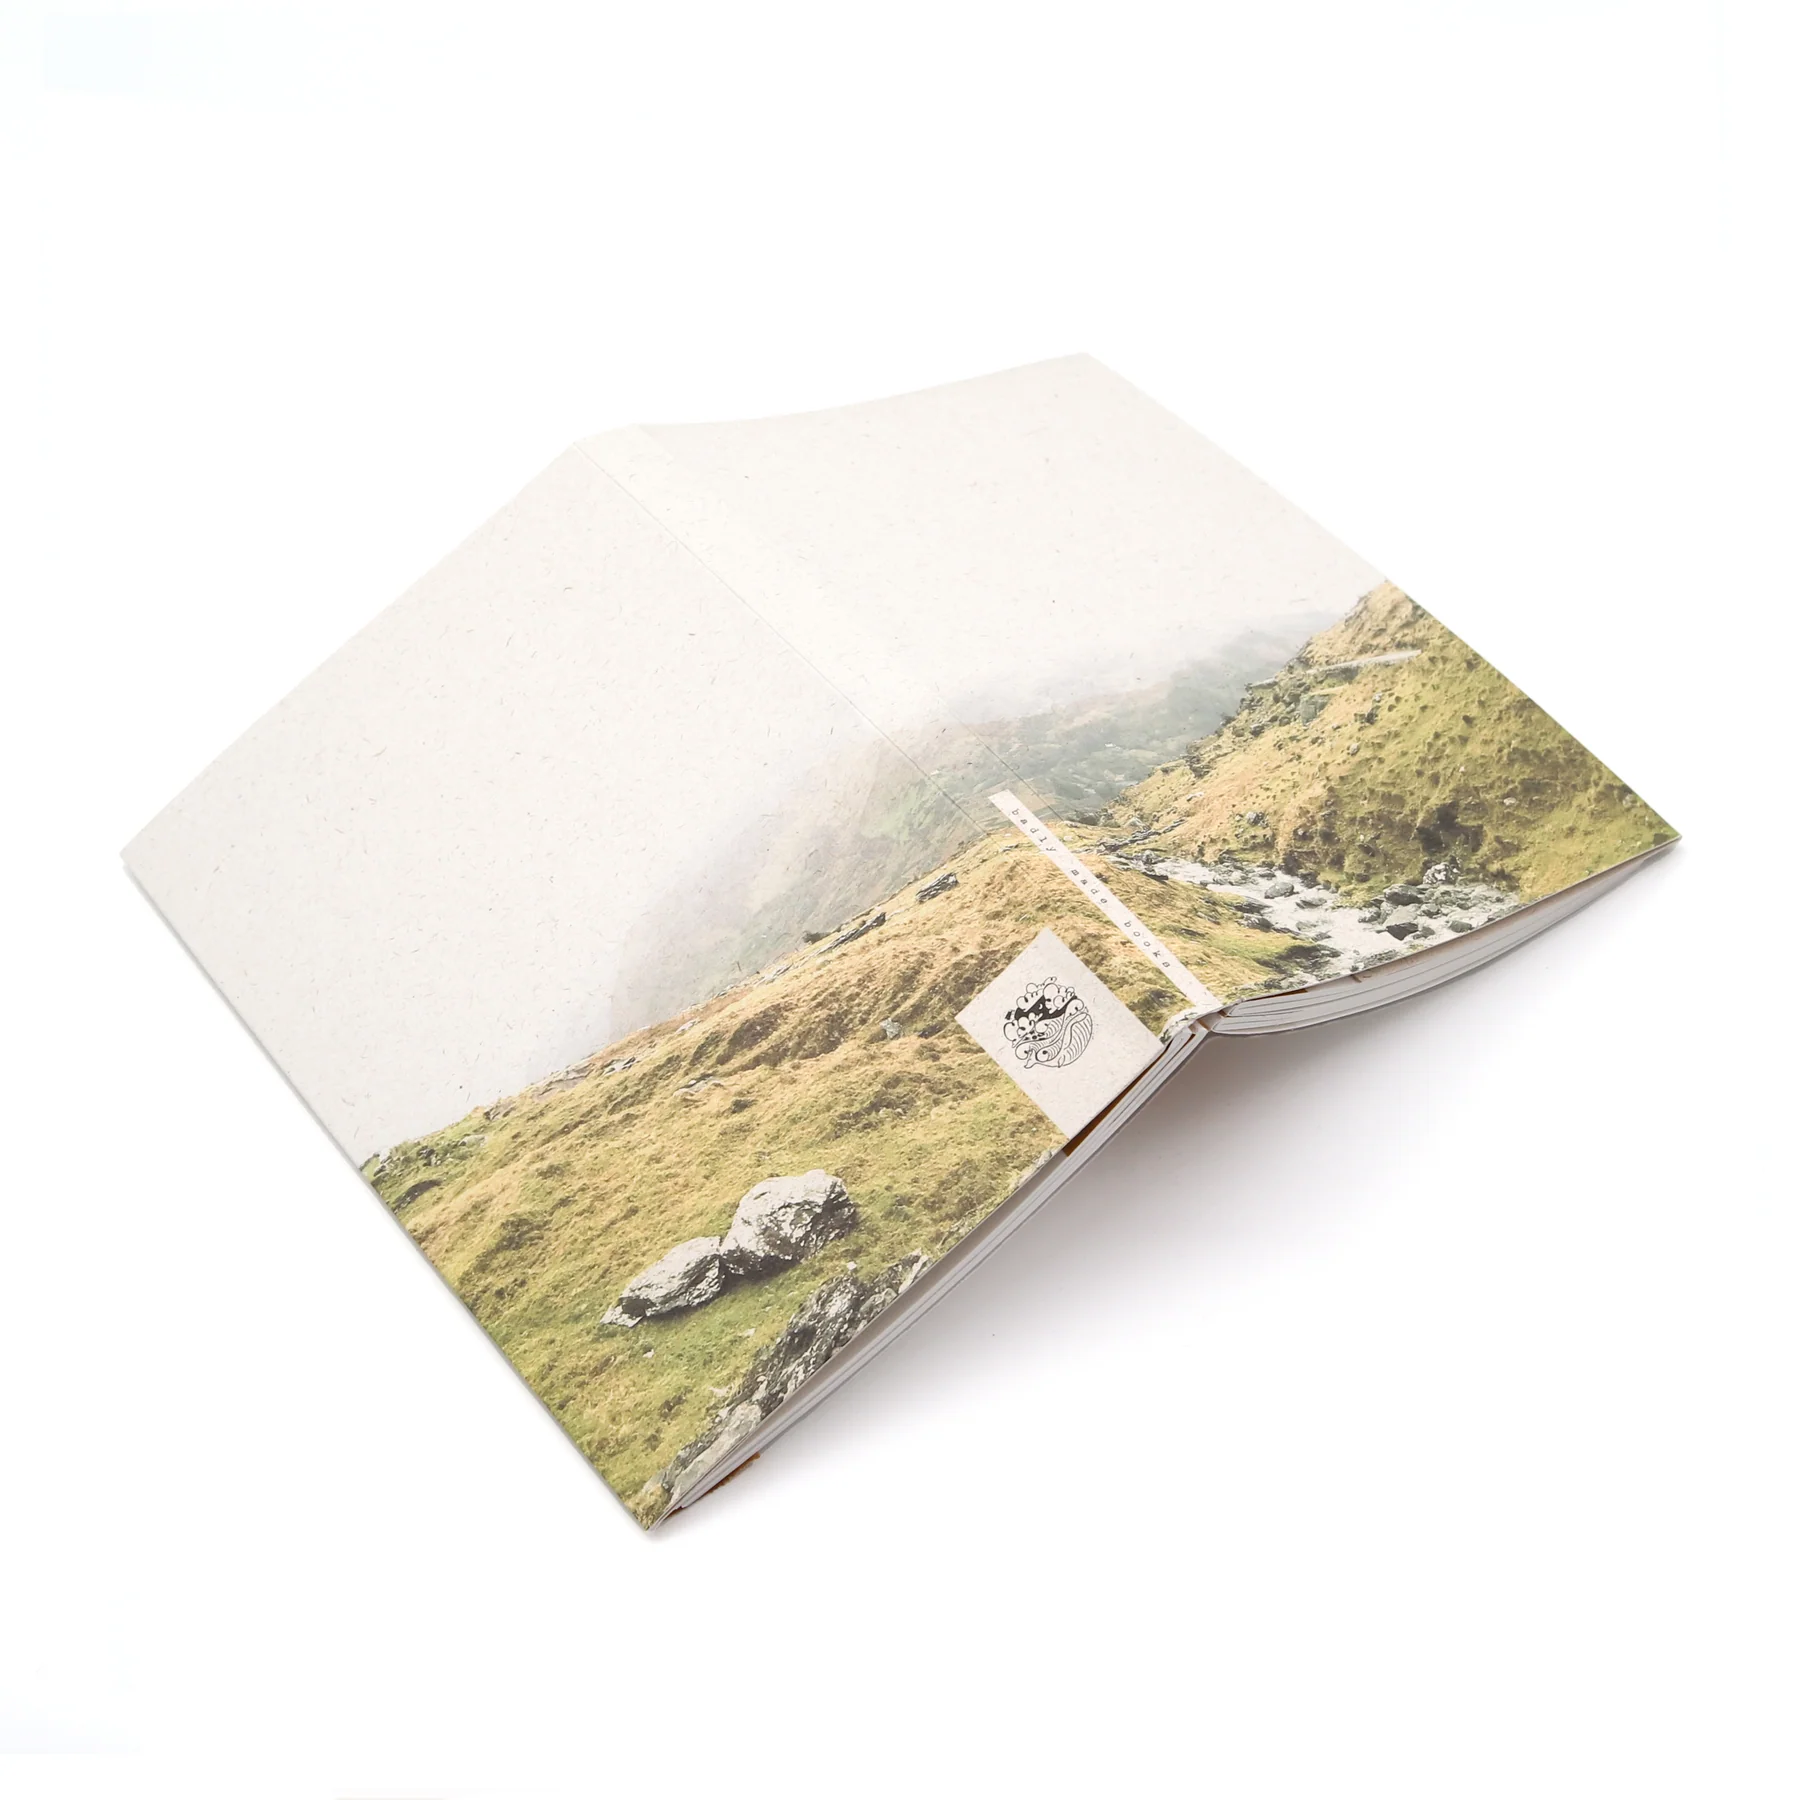 Badly Made Books - A5 Castletown Notebook